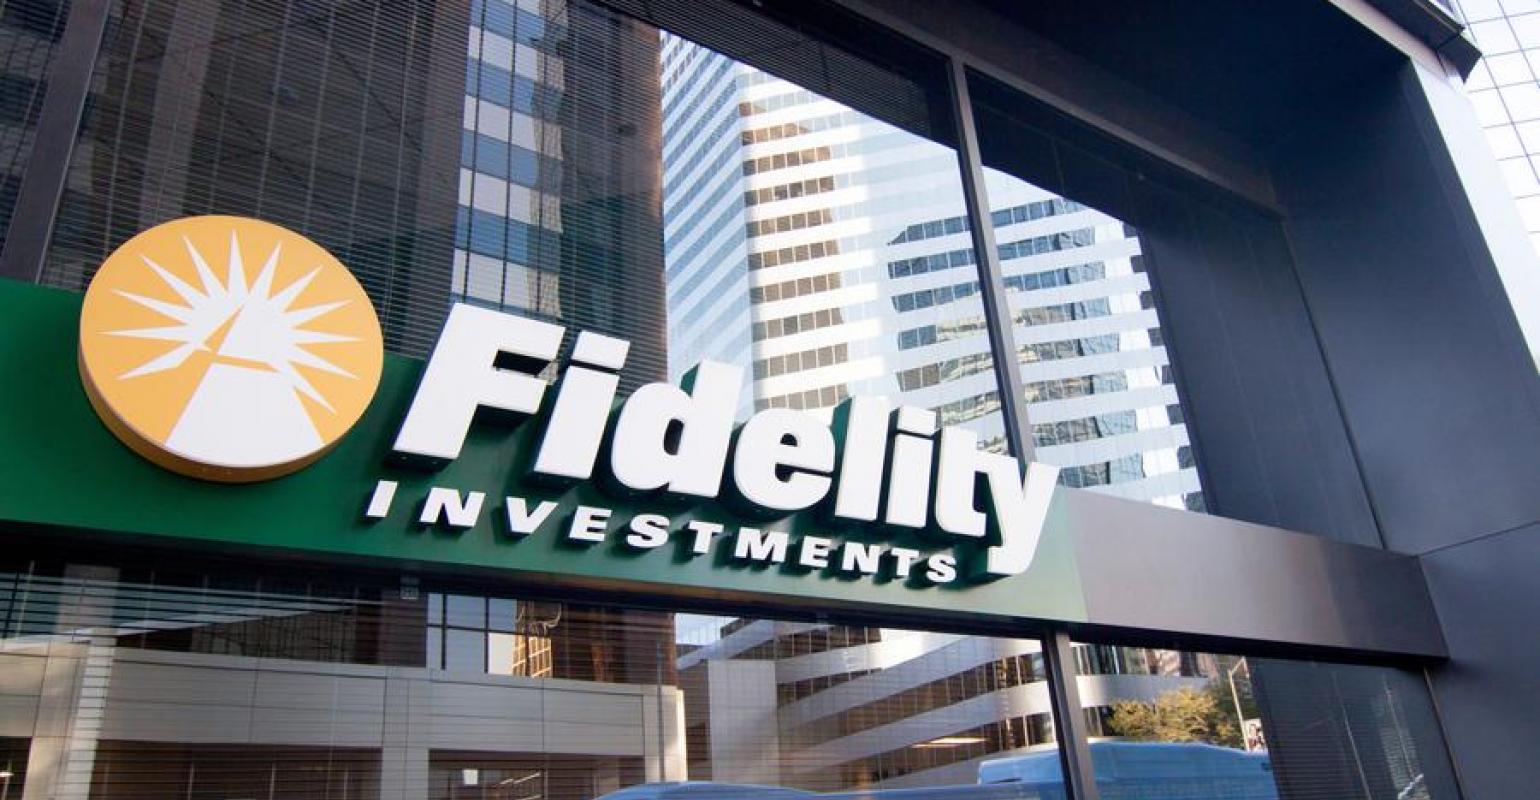 Fidelity Investments - Wikipedia